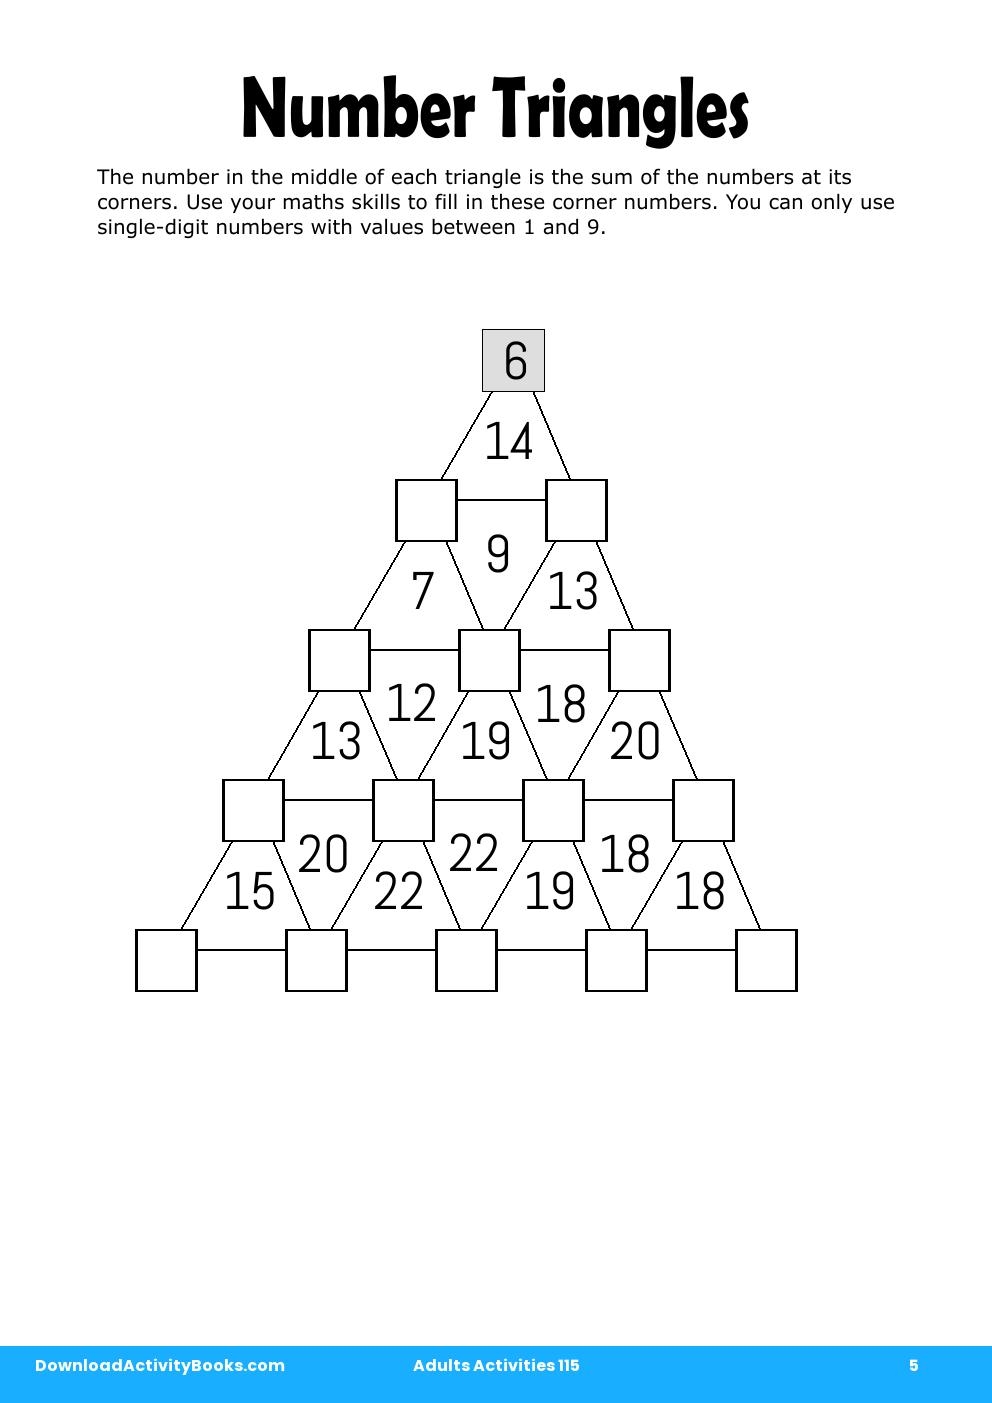 Number Triangles in Adults Activities 115